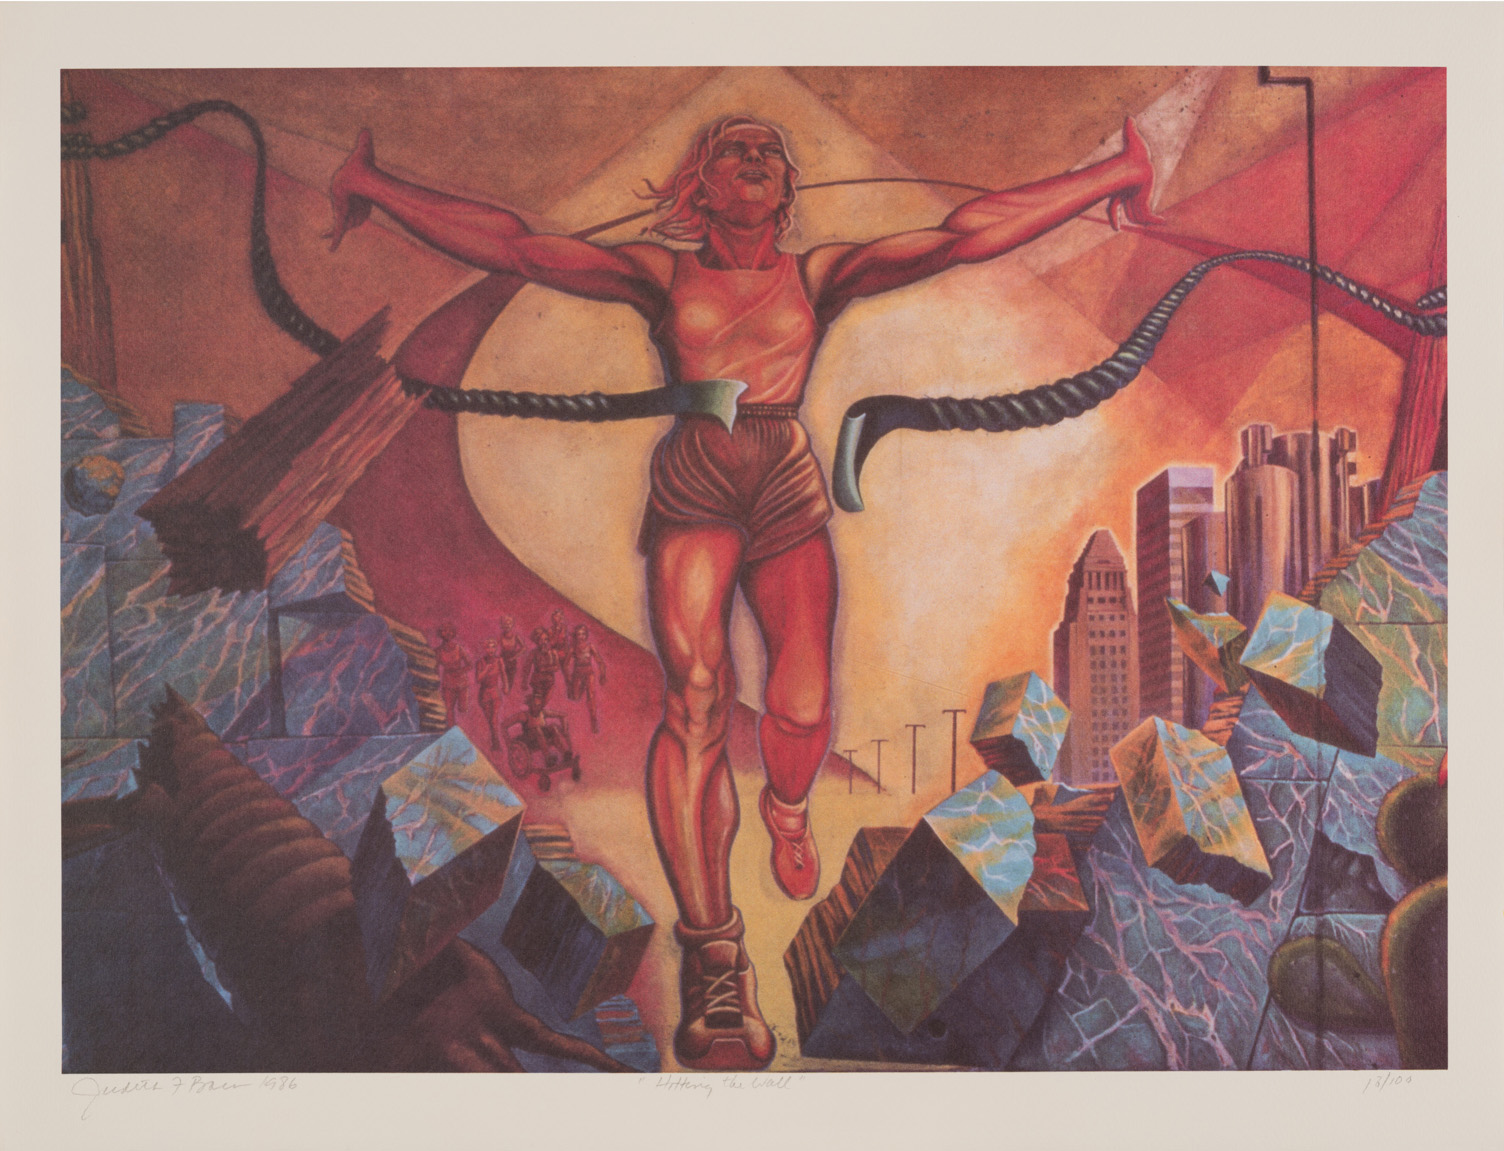 Judy Baca, <em>Hitting the Wall</em>, 1986, Giclée print, 20 x 26 in. UCI Jack and Shanaz Langson Institute and Museum of California Art, Gift in memory of UCI Professor Emeritus Michael D. Butler